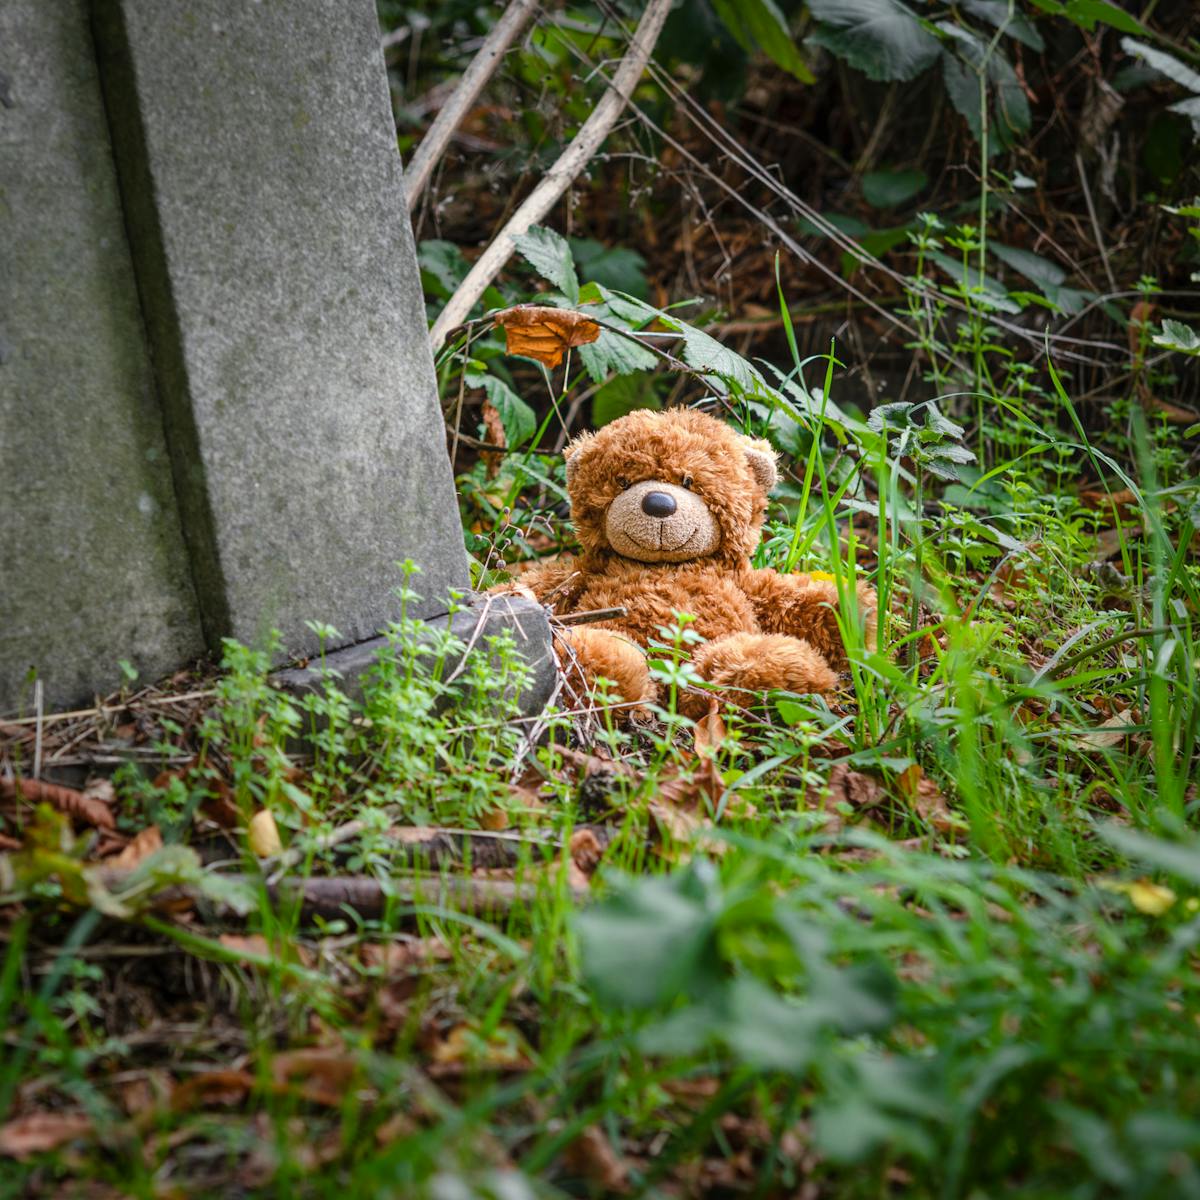 Photograph of small teddy bear sitting within the surroundings of a cemetery, with grave stones and ivy.